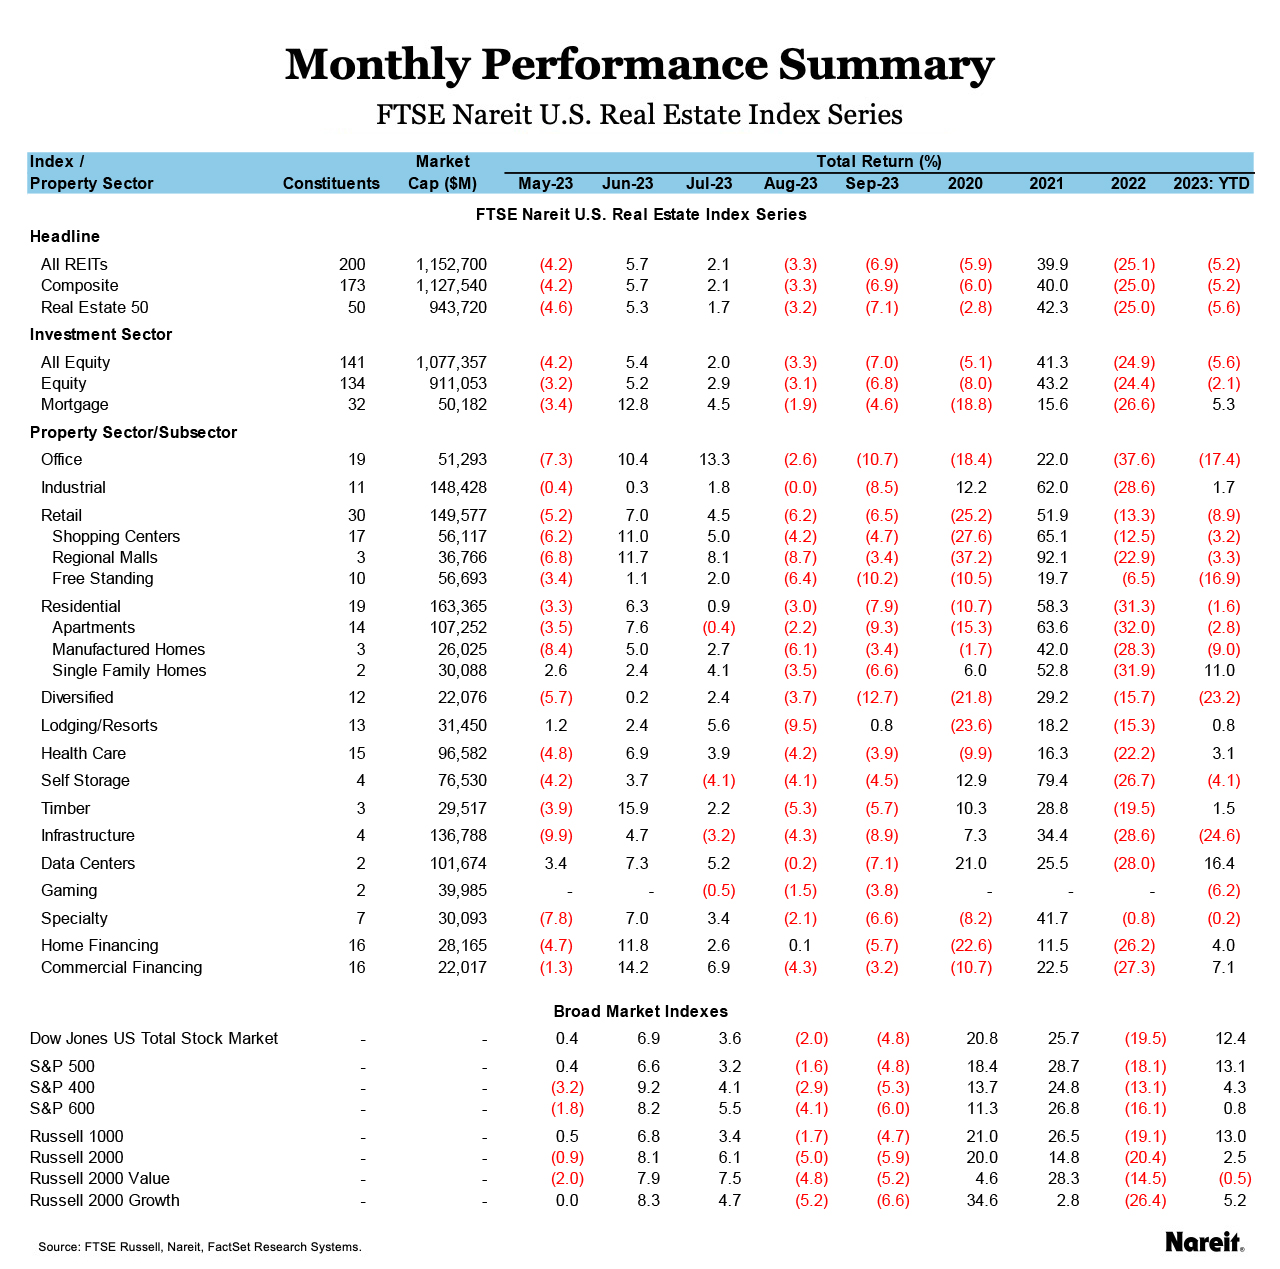 Monthly Performance Summary September